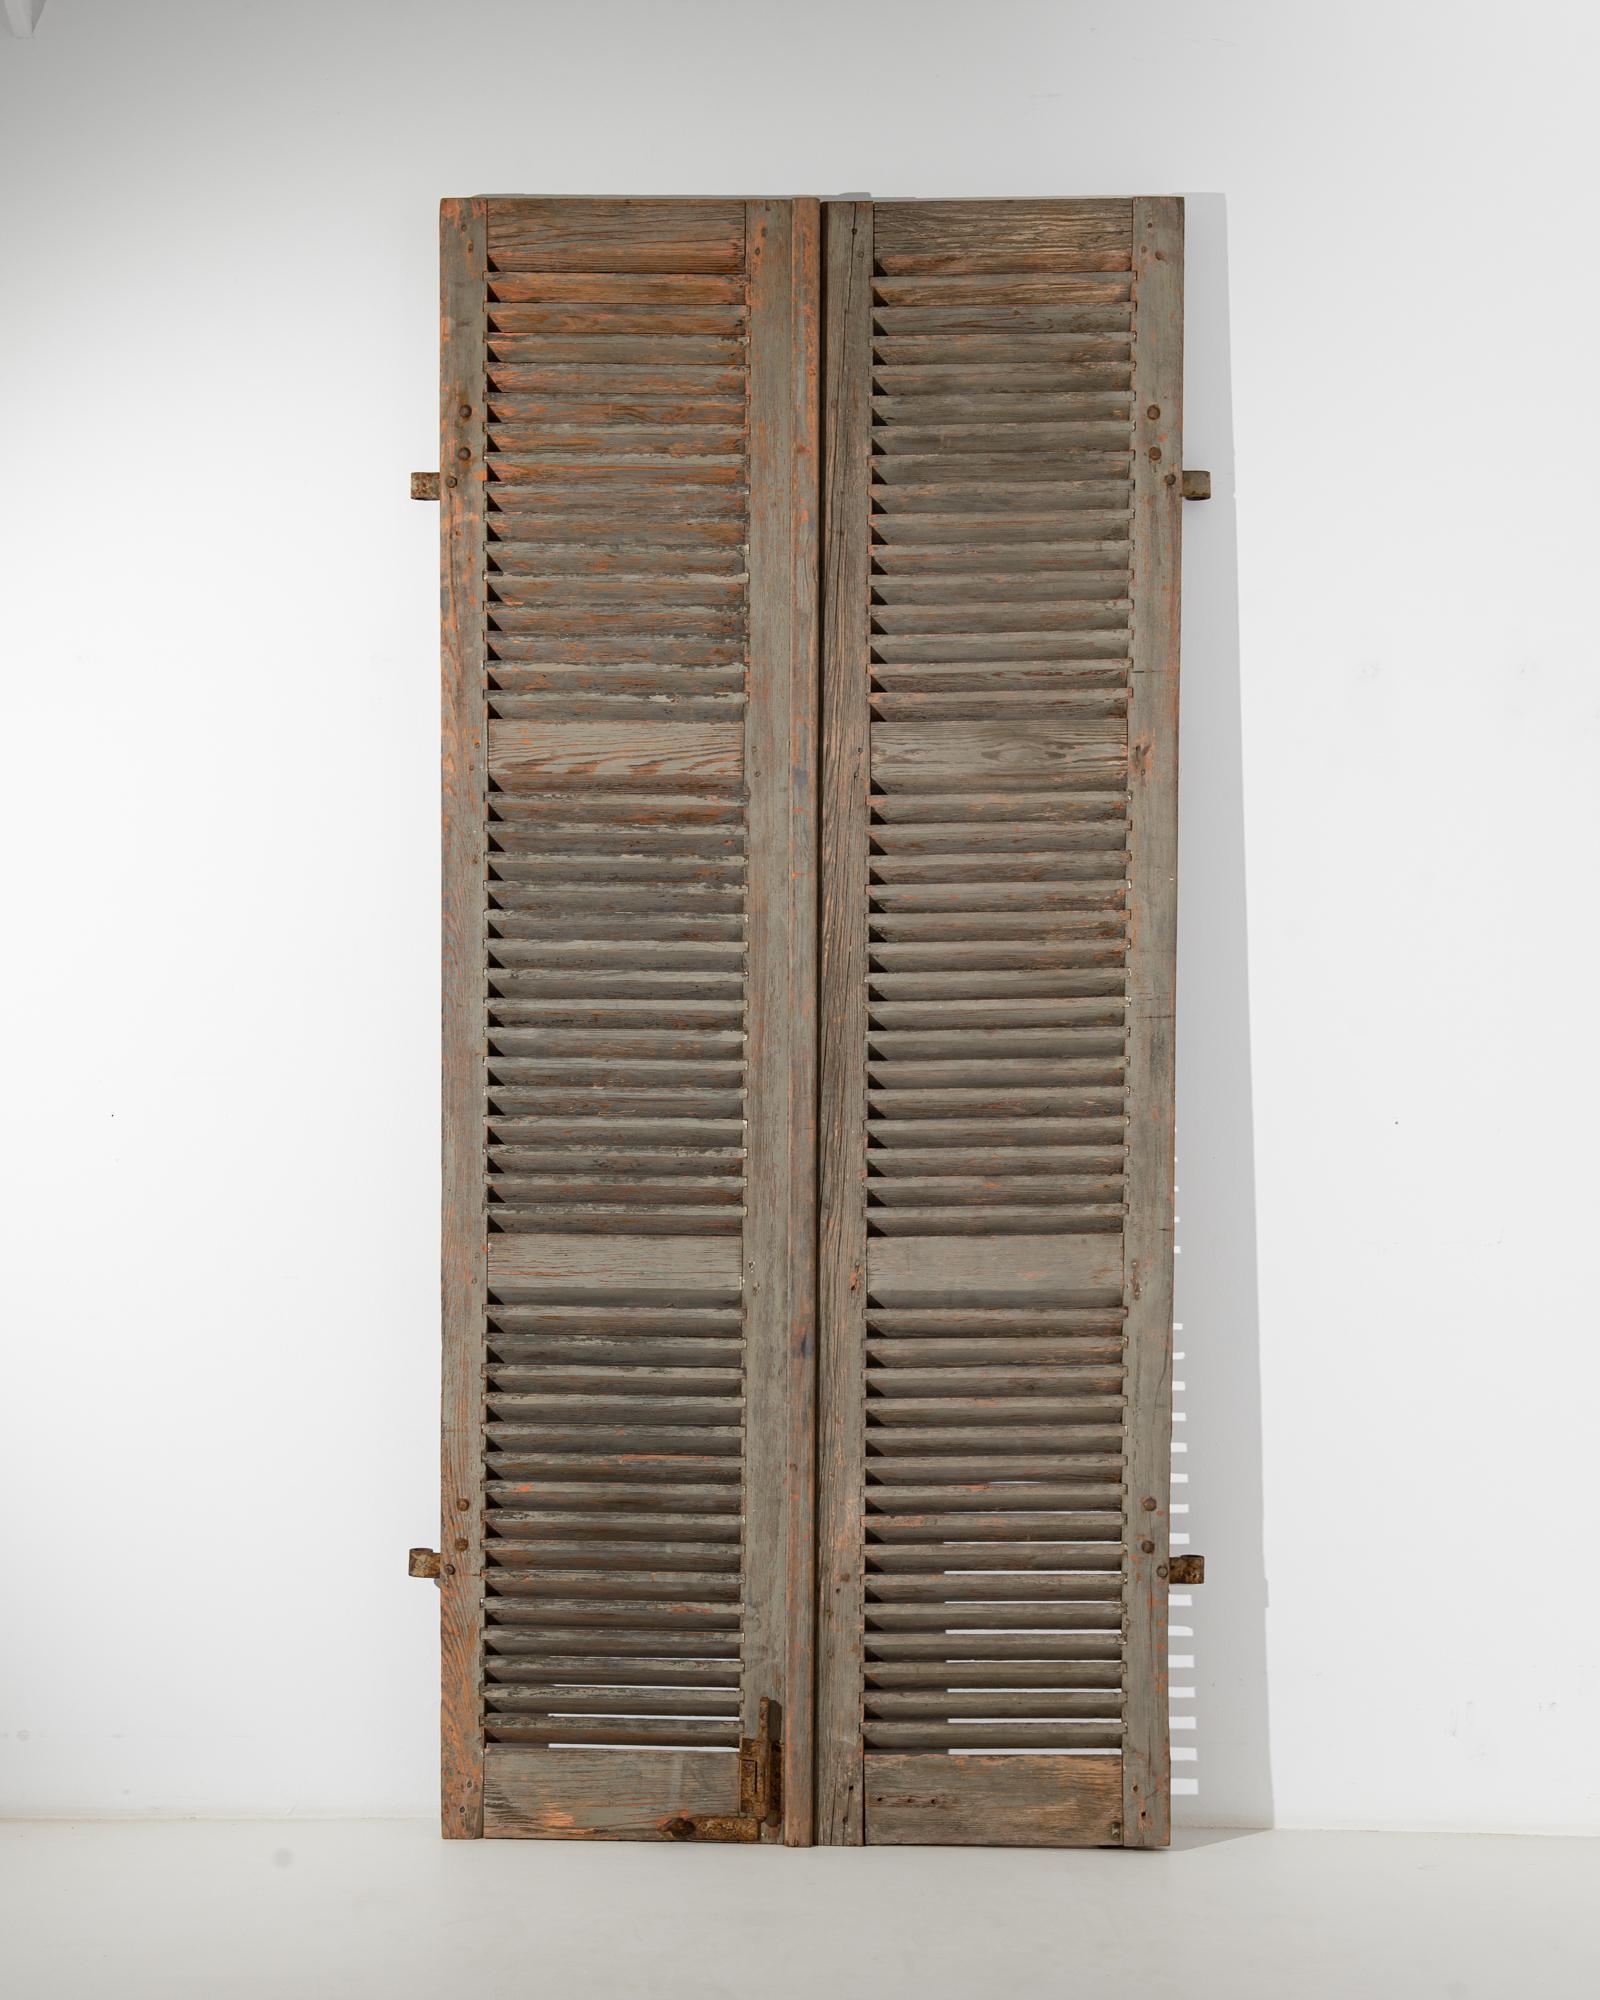 A pair of wood shutters from 19th century France. Standing at an impressive height, these vintage shutters impose their bravado while simultaneously emitting a welcoming warmth. A lively and colorful patina, a time-worn sliding bolt lock, and wooden